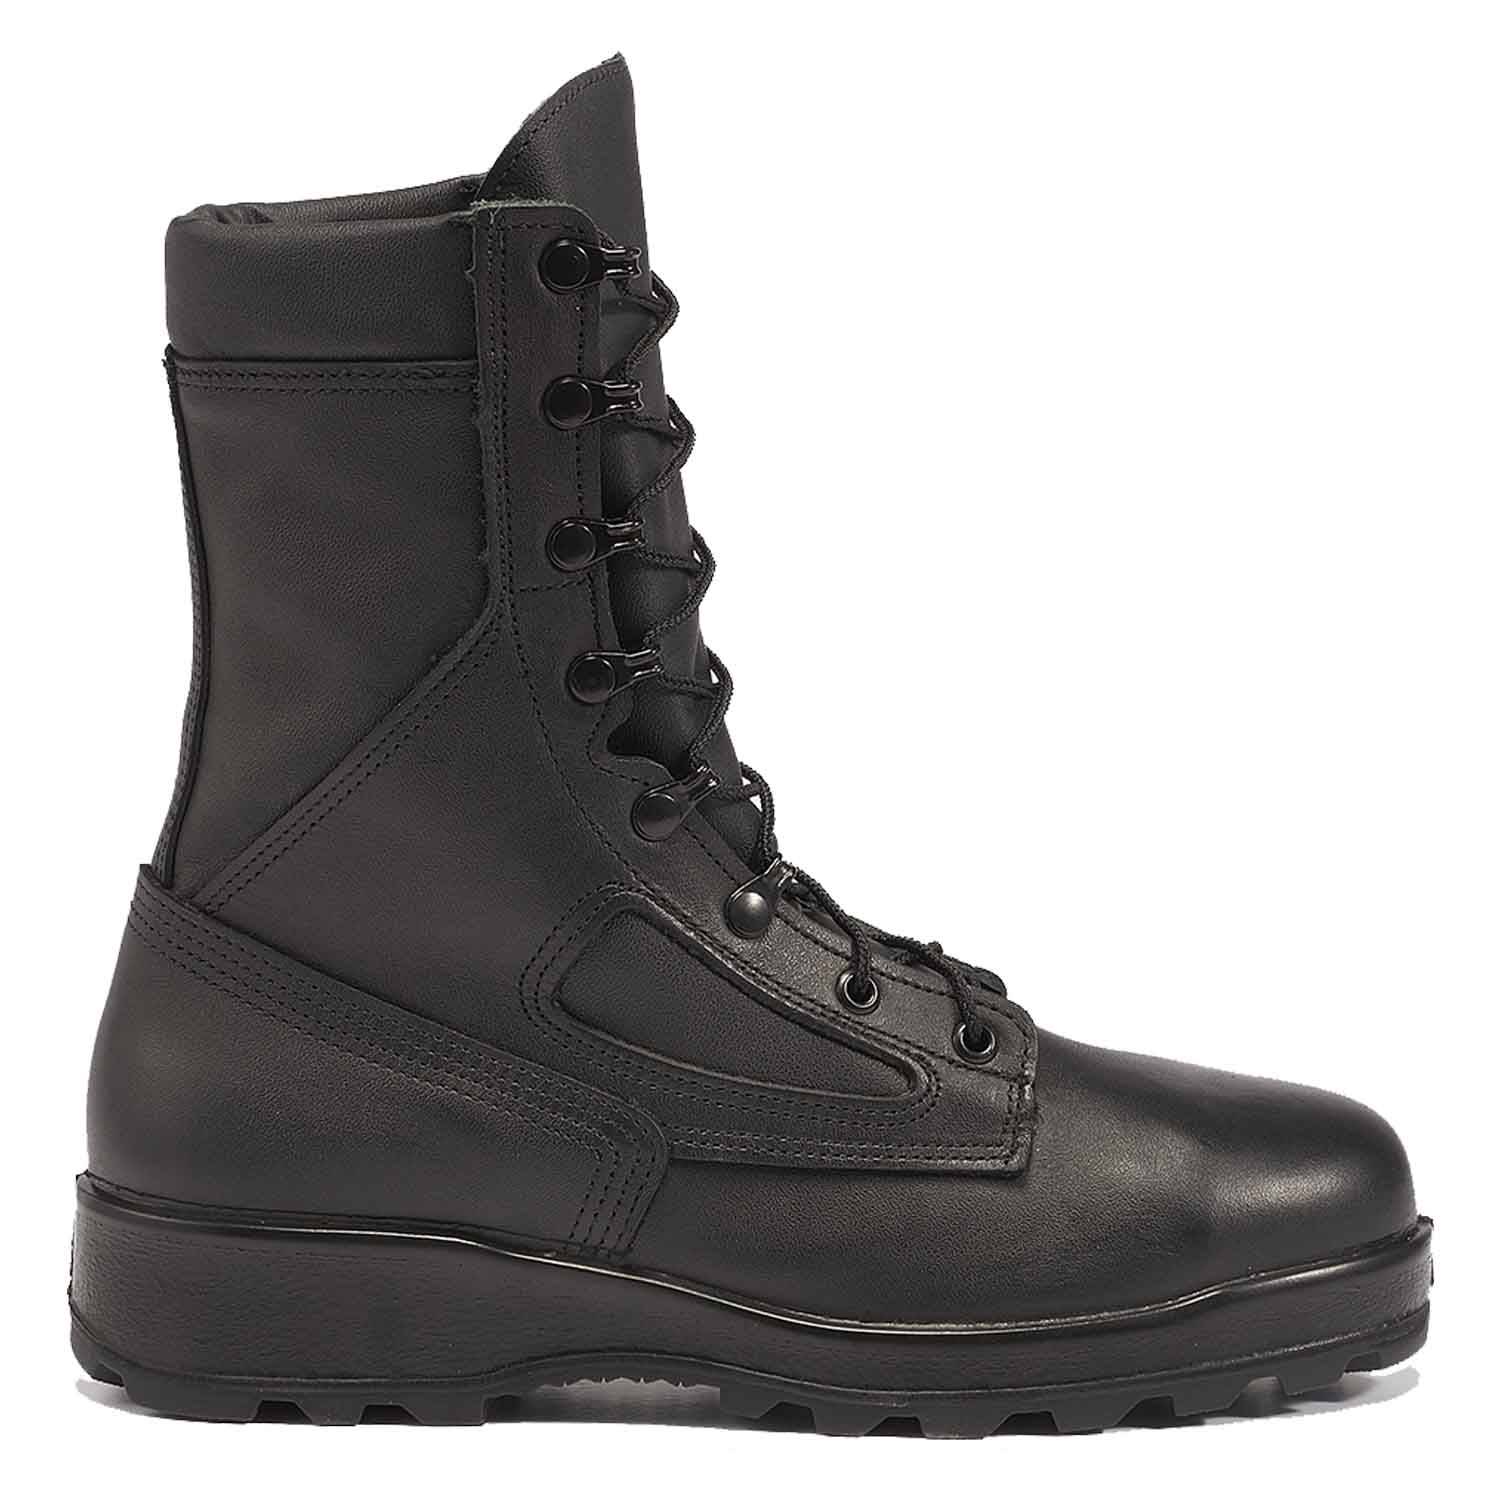 Belleville US Navy General Purpose Steel Toe Military Boots